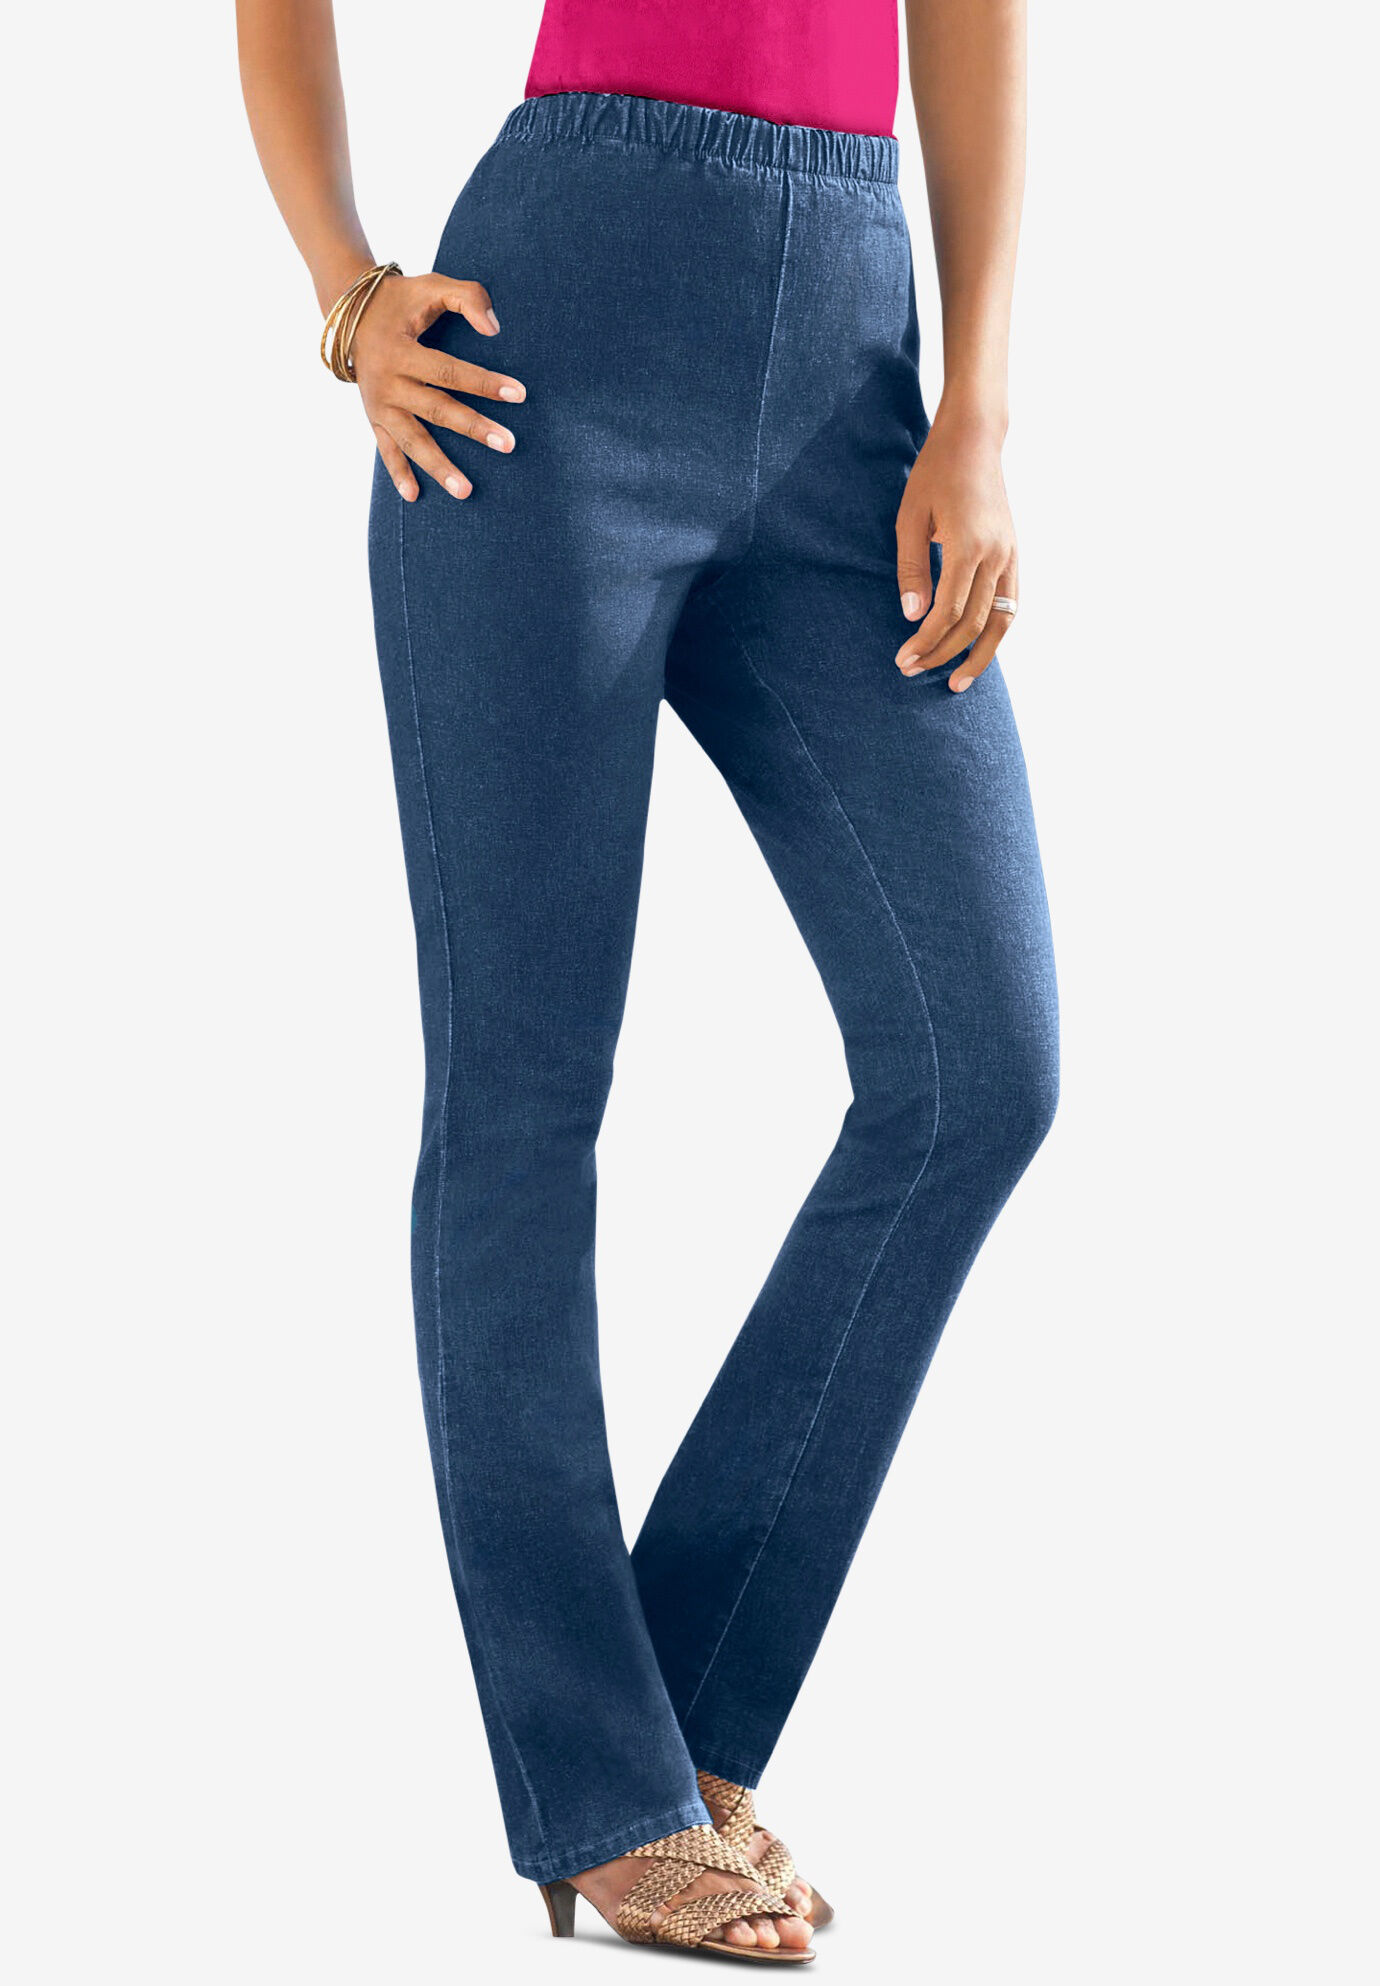 pull on stretch jeans plus size